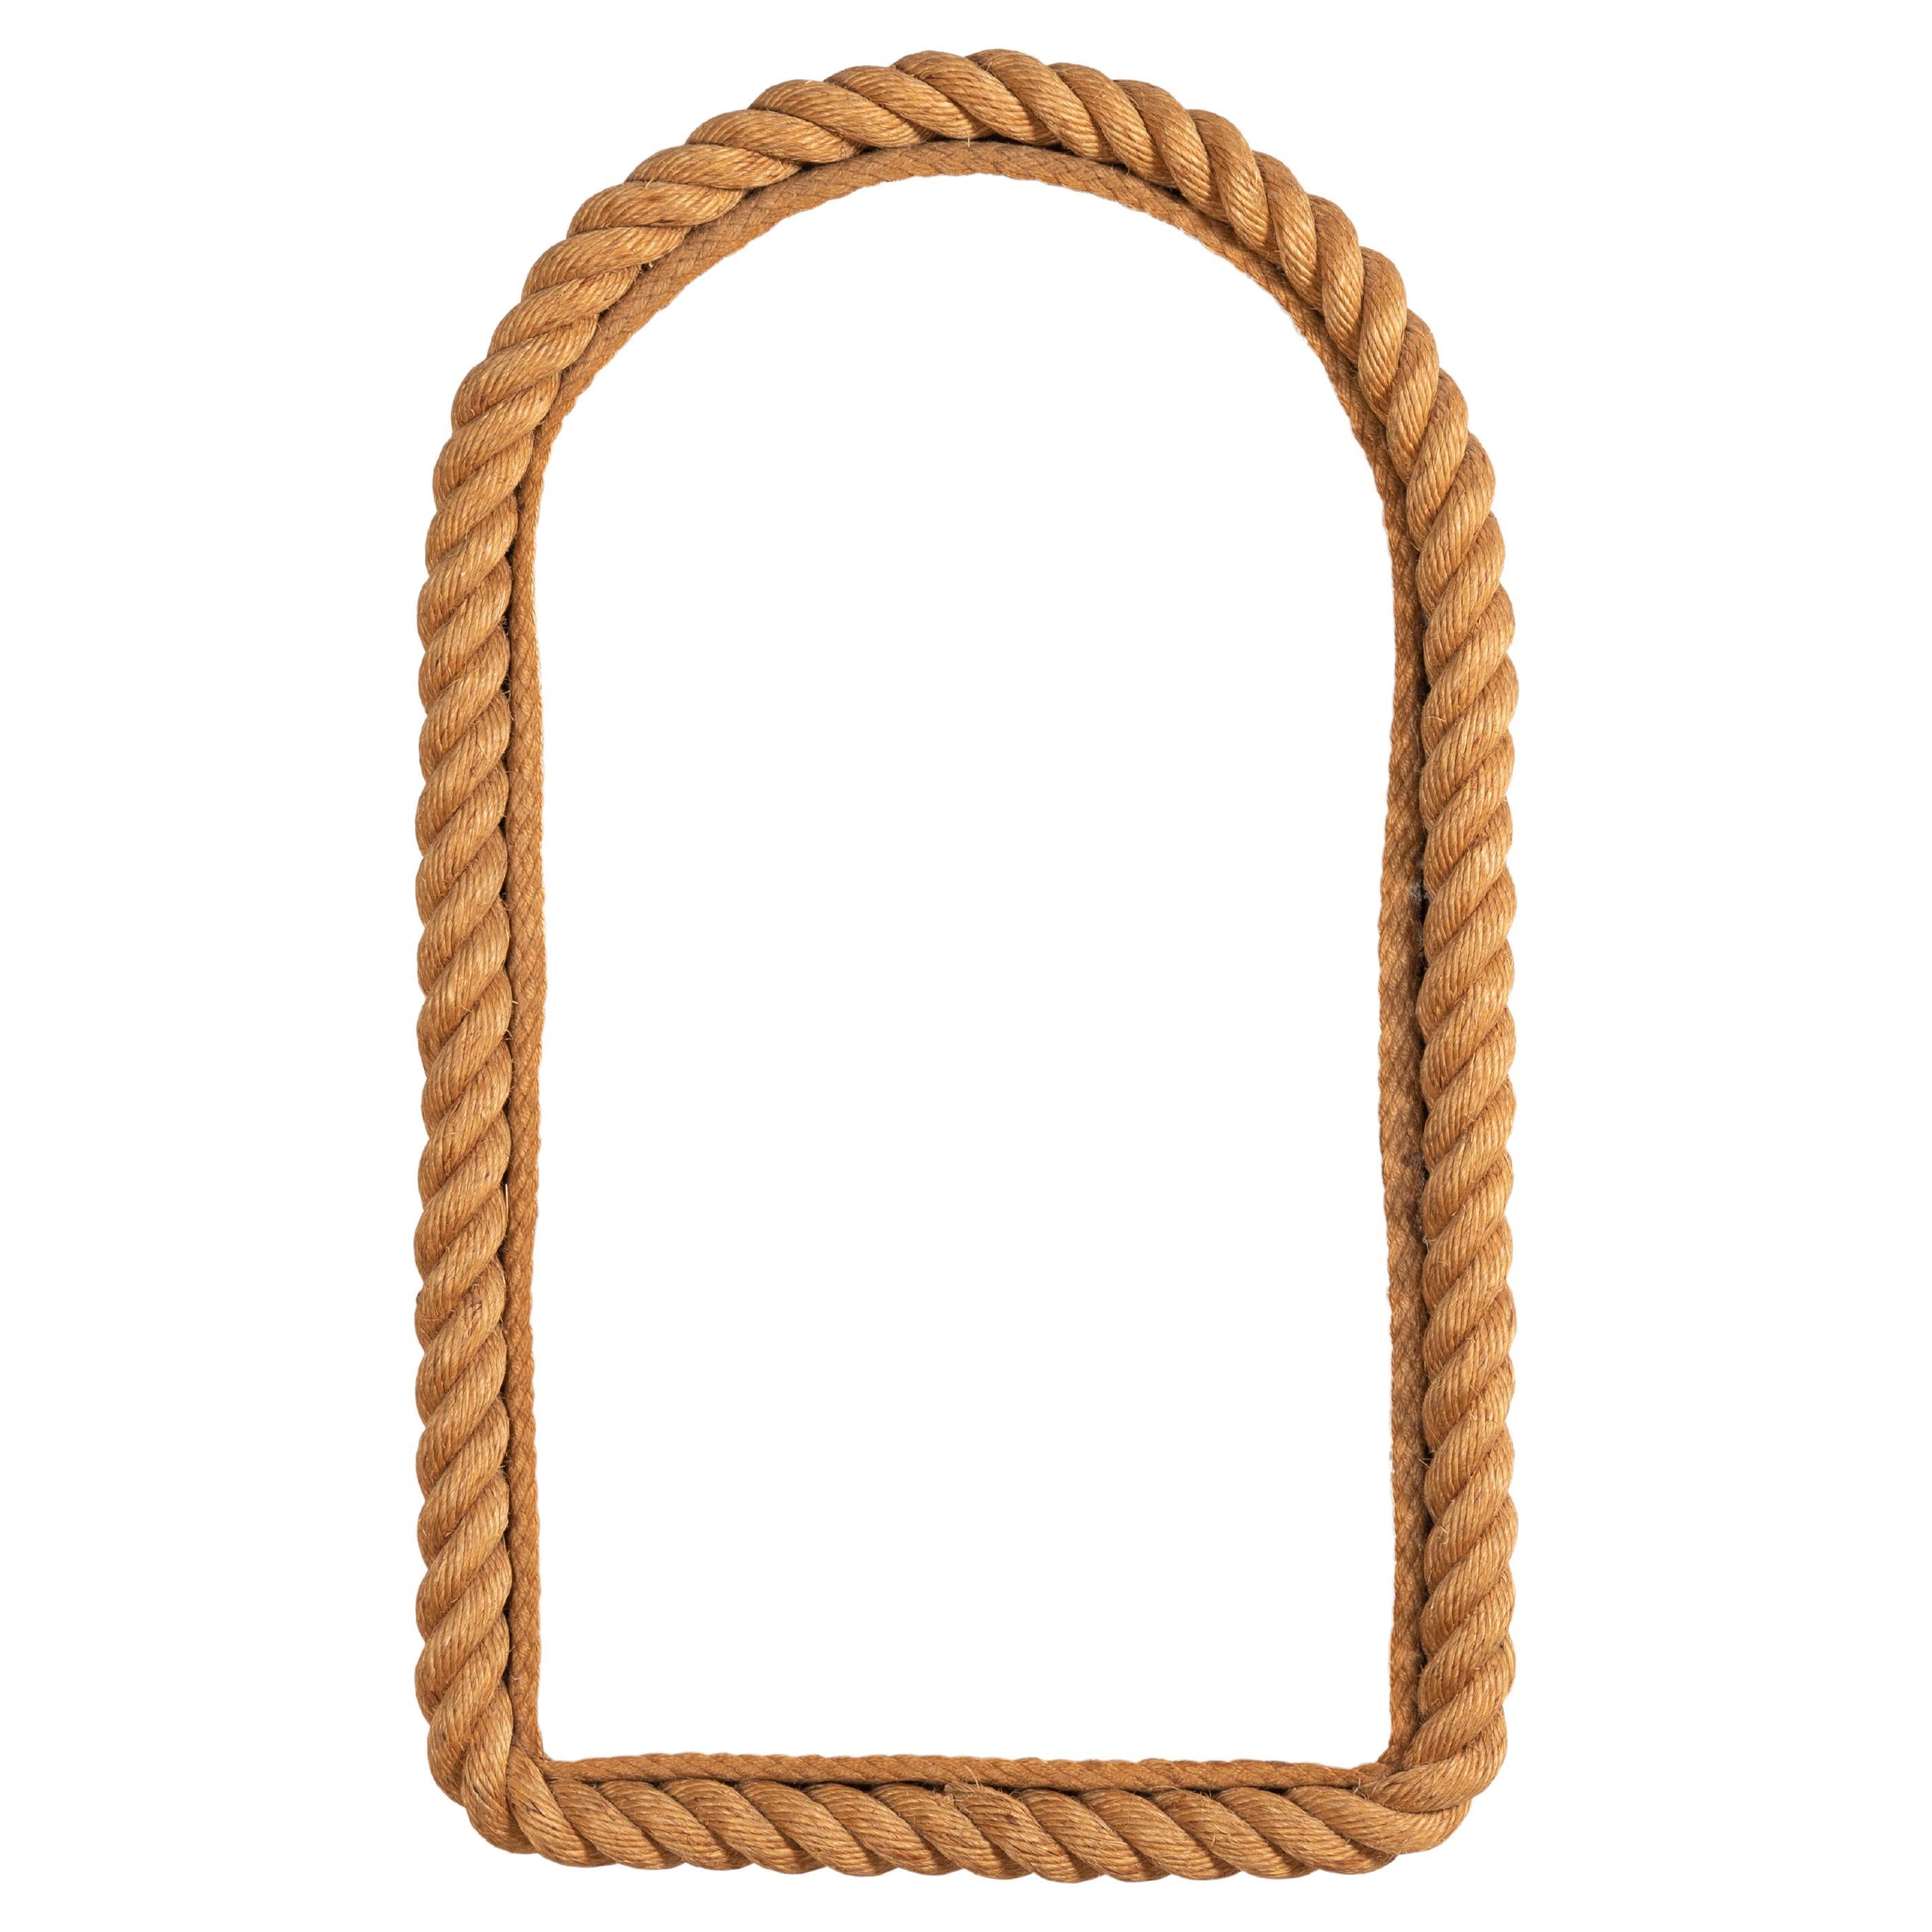 Rope framed Mirror, Adrien Audoux and Frida Minet

France, circa 1950s.

Adrien Audoux and Frida Minet are famous for their work with rope. Their first workshop was founded in 1929 in Cannes, and they moved to GolfeJuan in 1942.

Dimension :